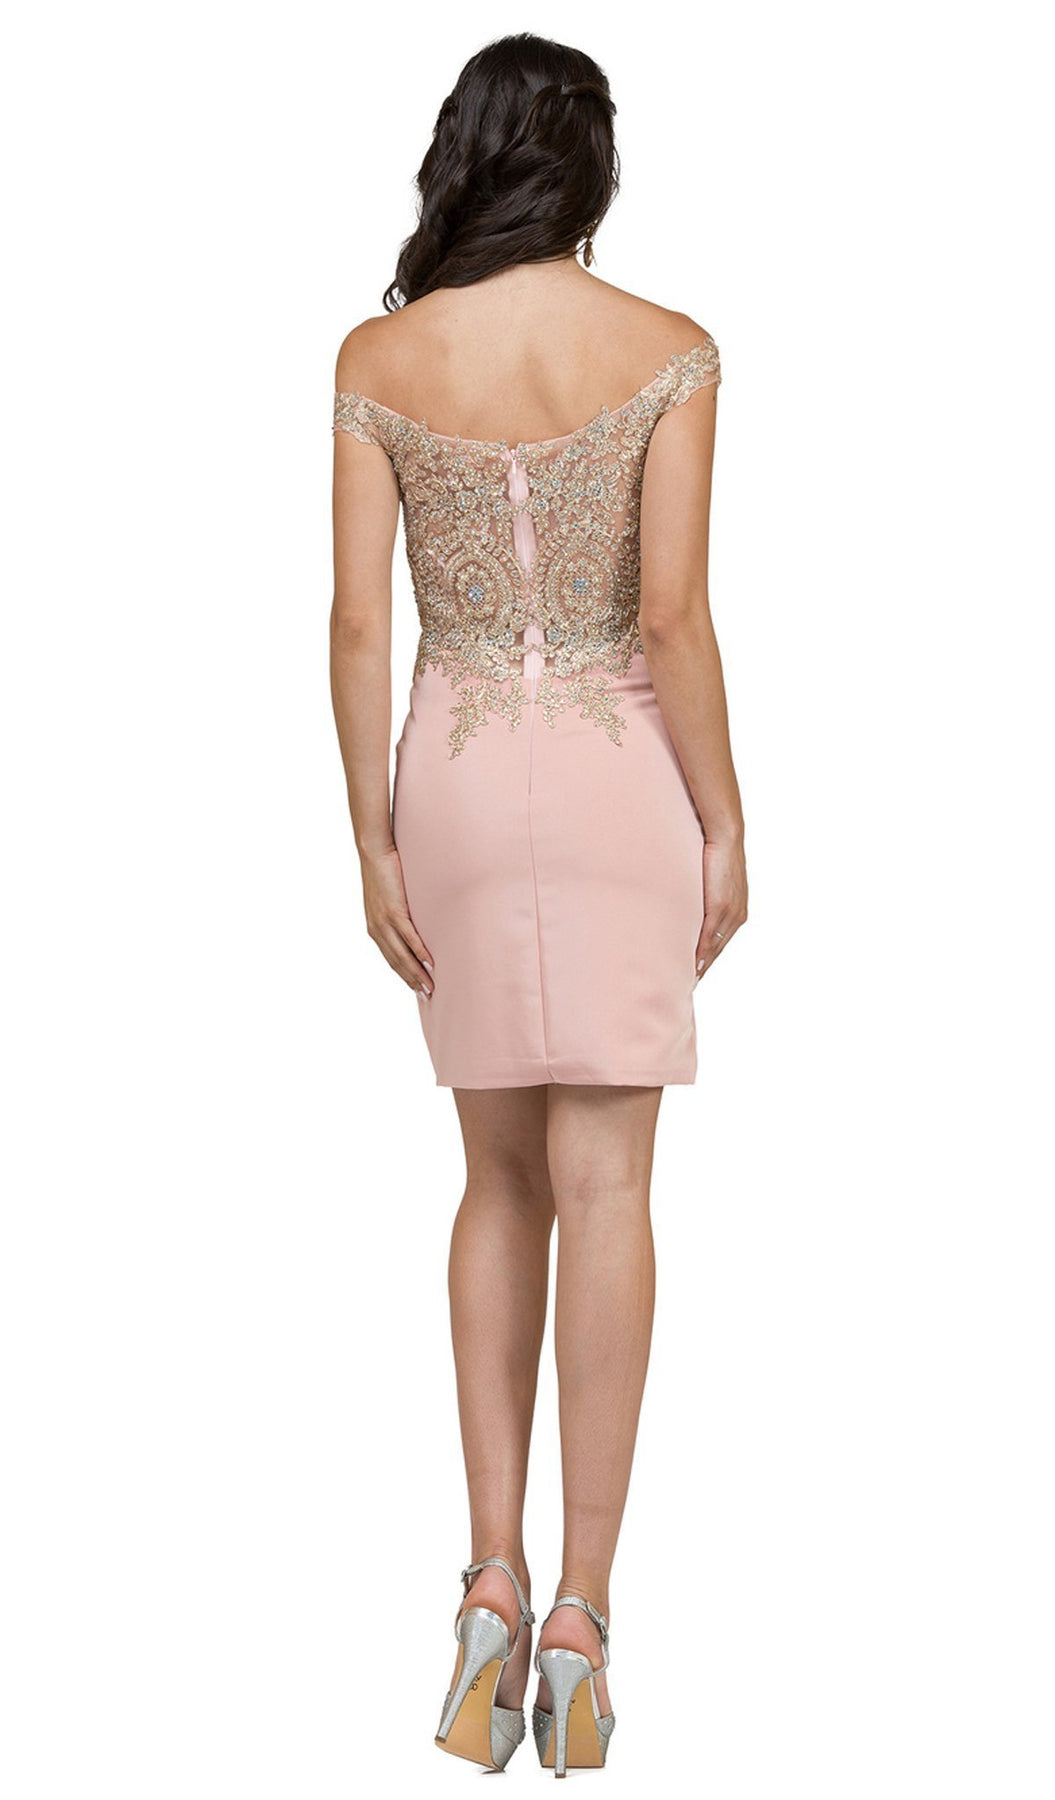 Dancing Queen - 2001 Lace Offa Shoulder Sheath Cocktail Dress in Pink